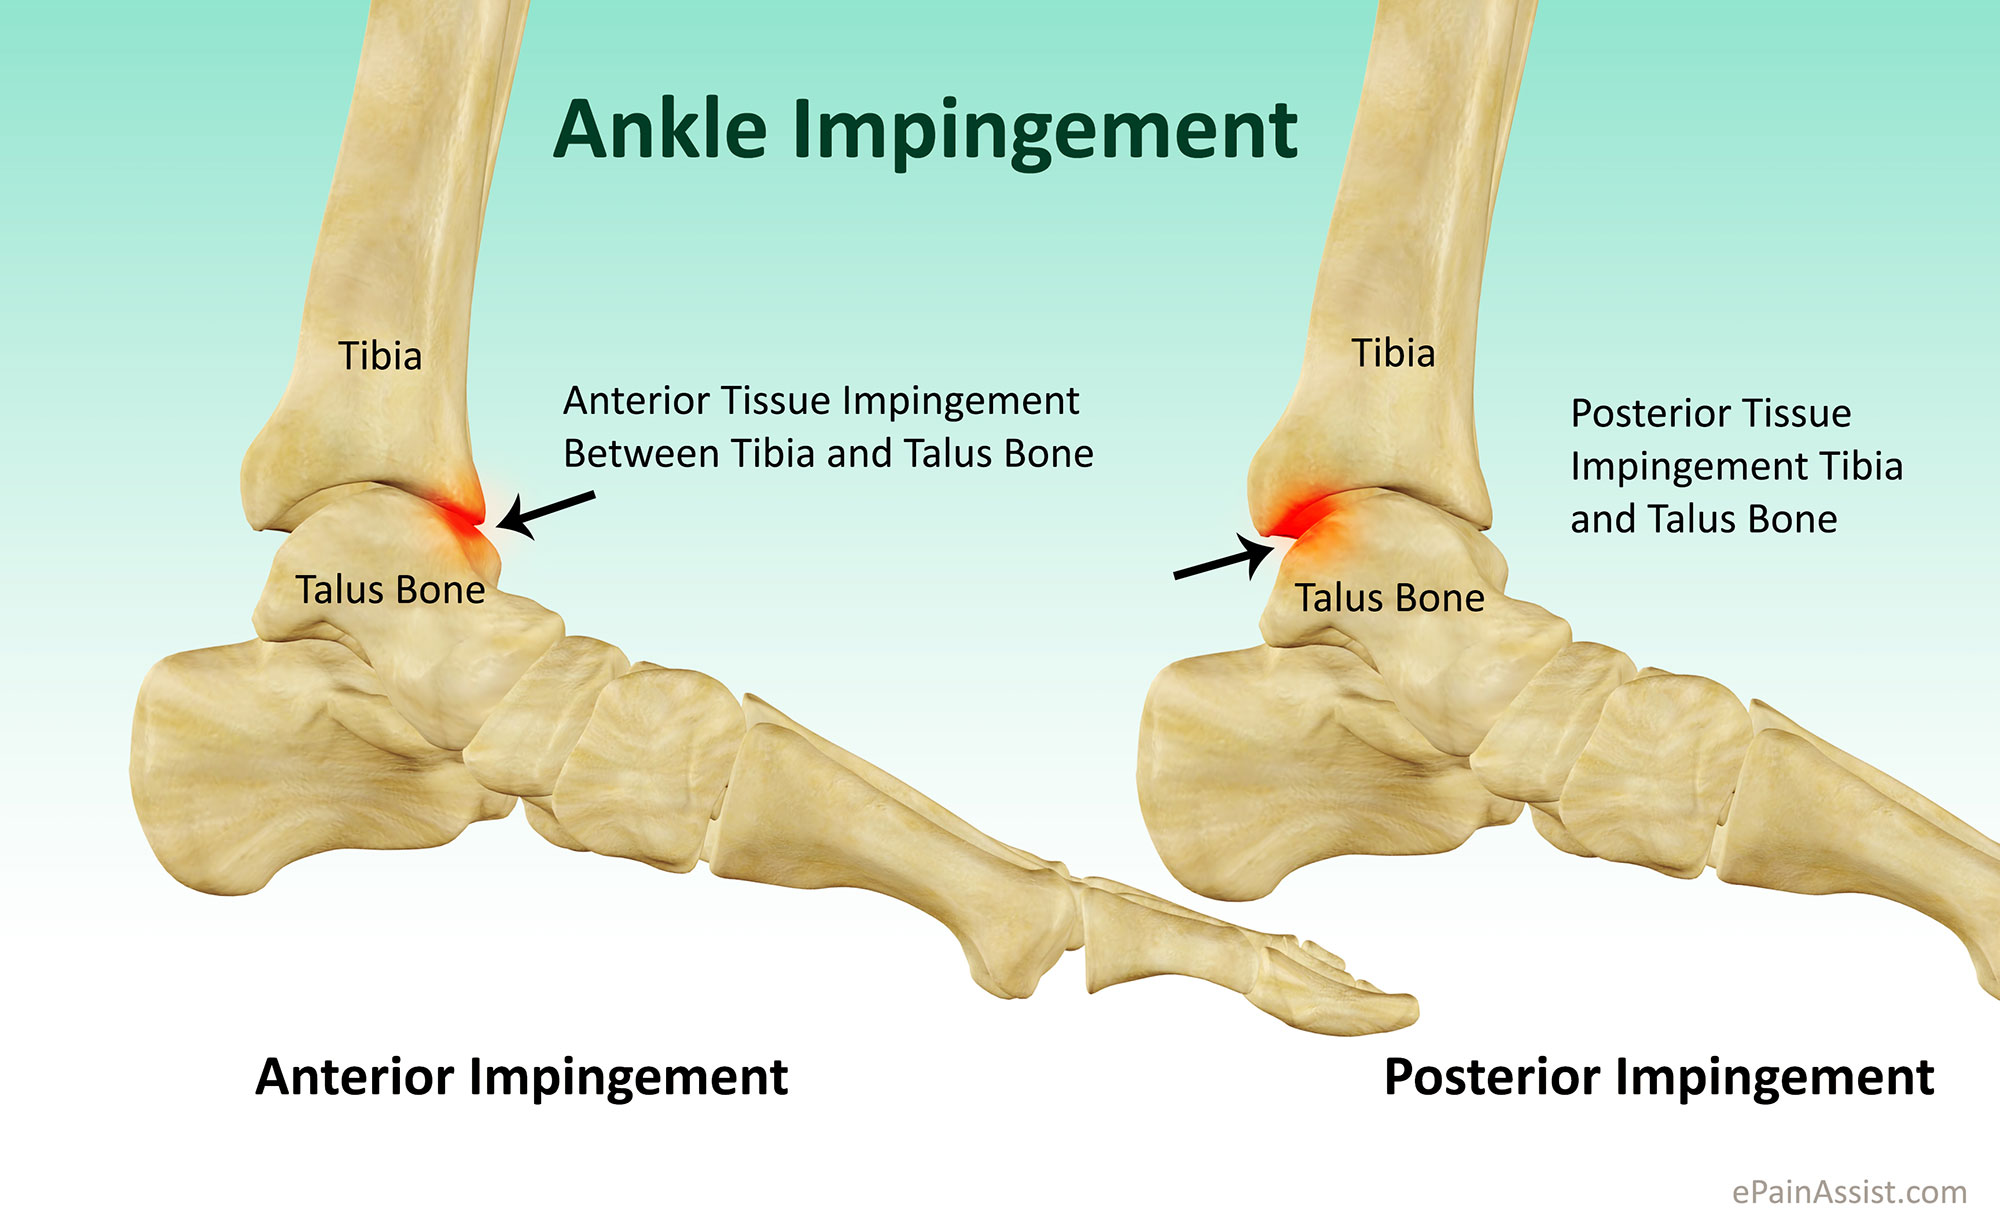 Posterior Ankle Impingement: Causes, Symptoms, and Treatment